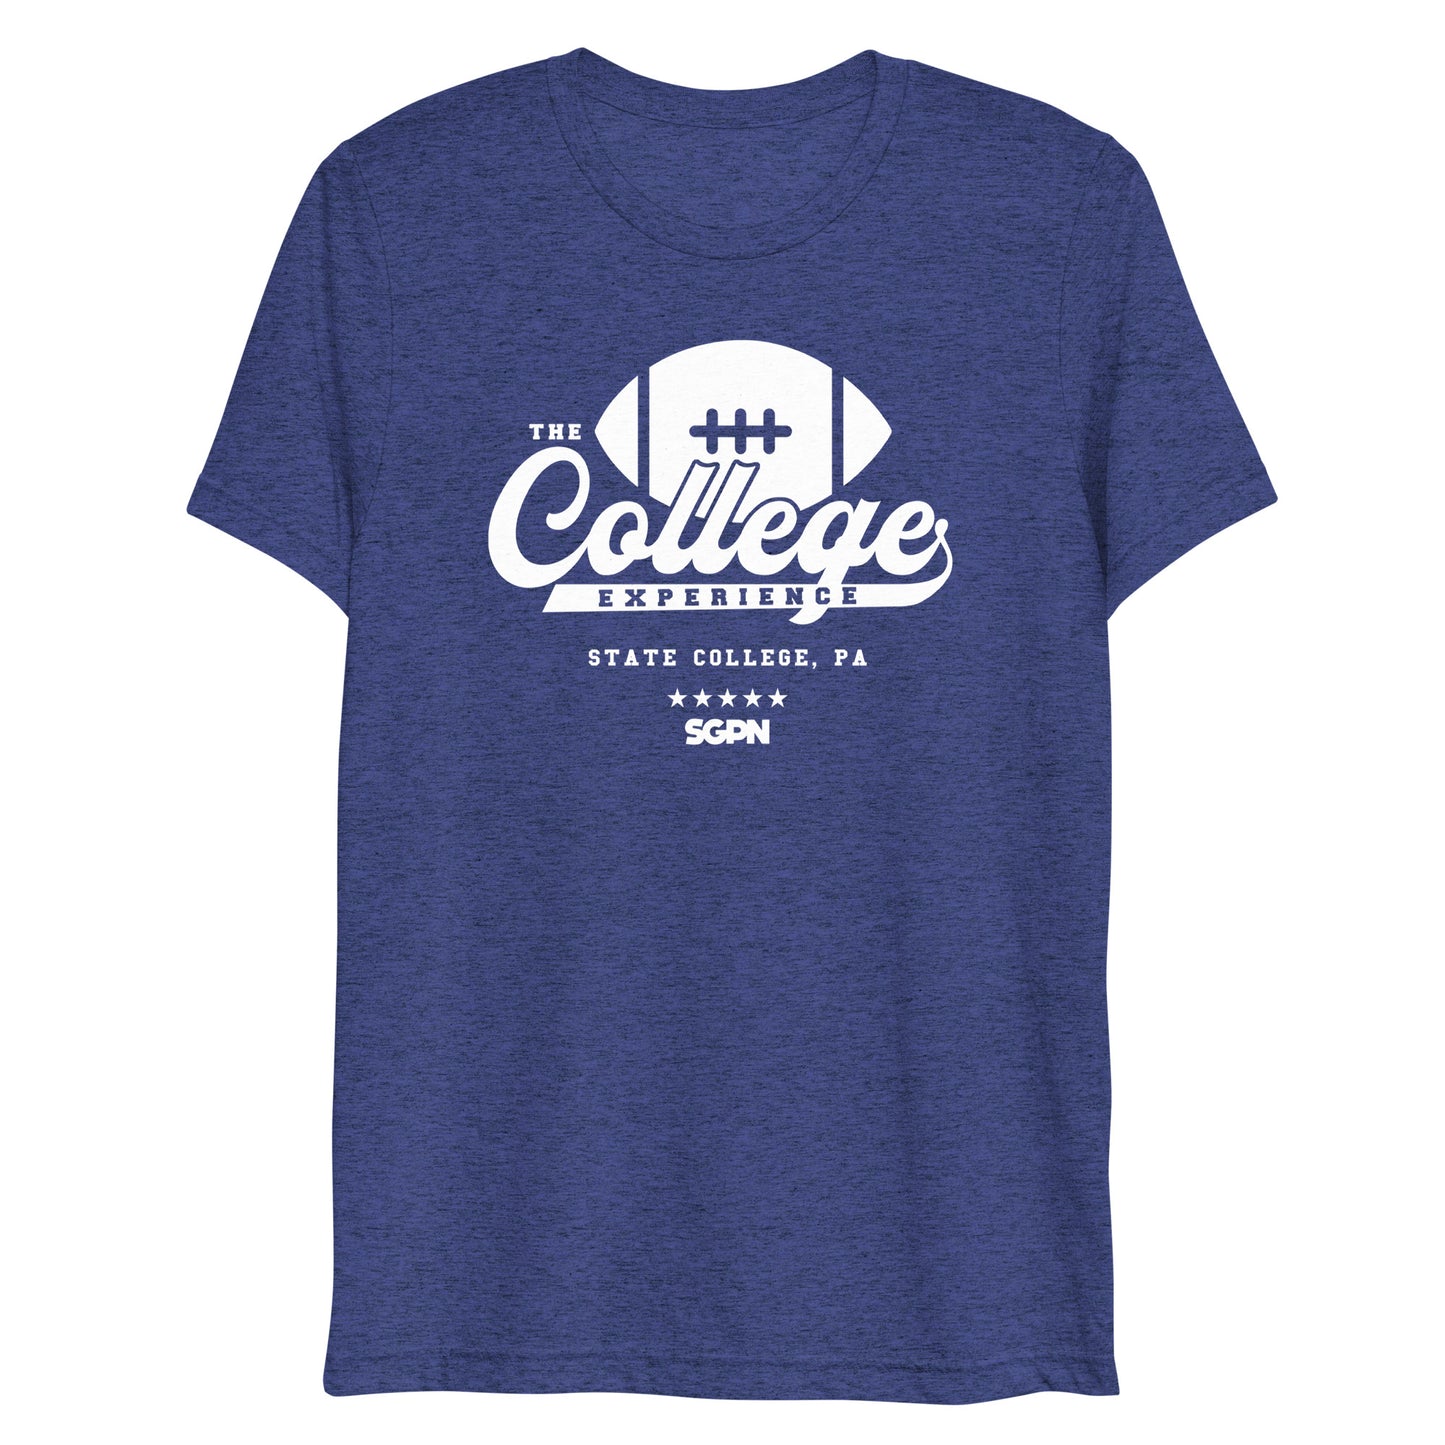 The College Football Experience - State College edition - Navy Short sleeve t-shirt